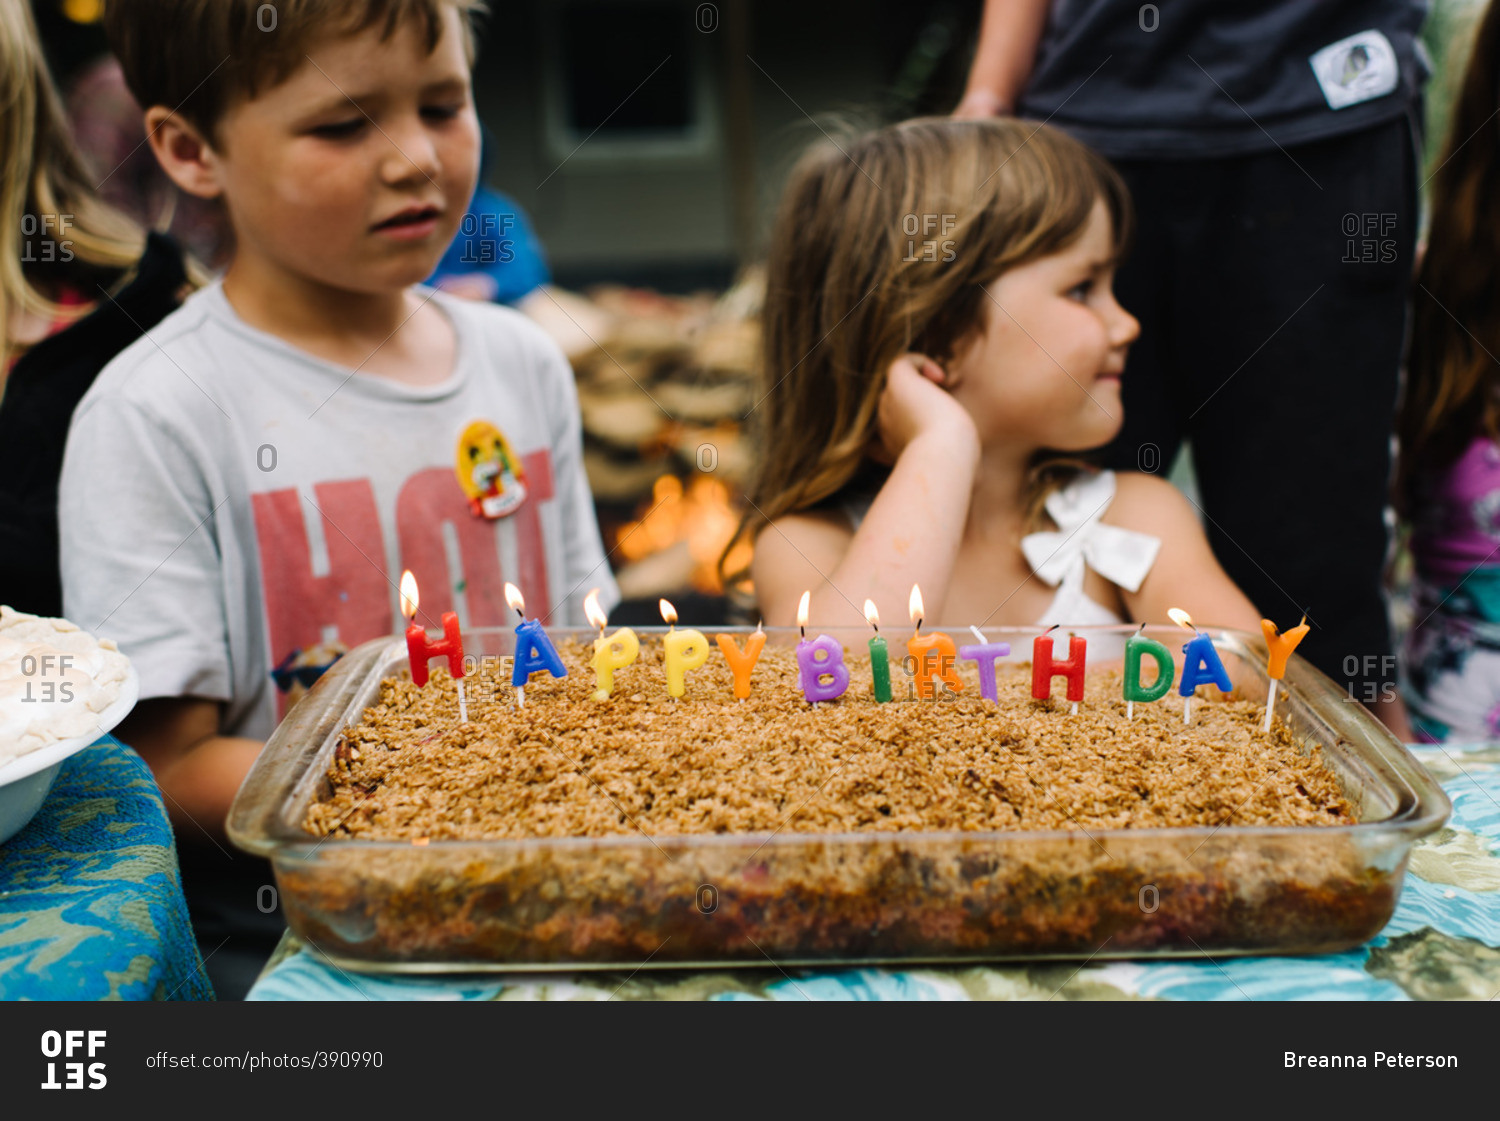 Children at a party with a cake that has happy birthday spelled out in candles